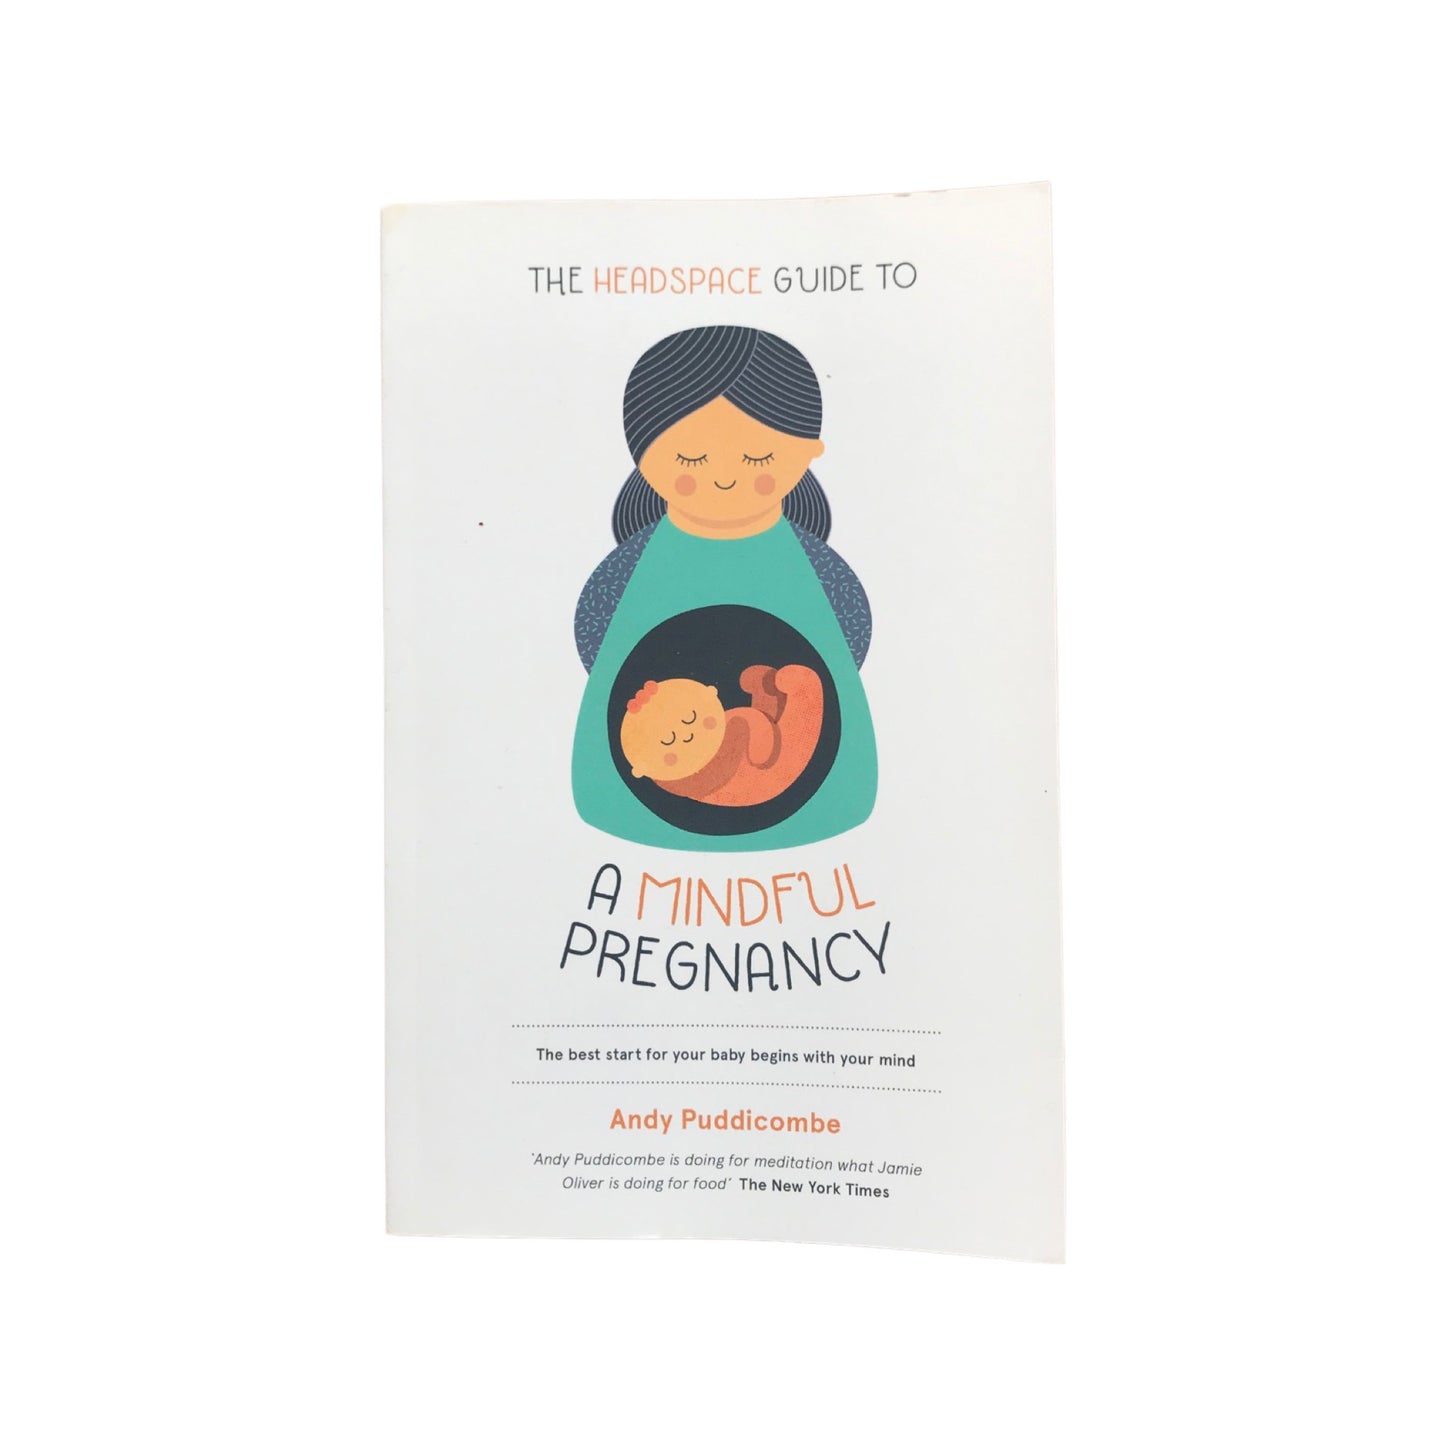 The Headspace Guide to a Mindful Pregnancy